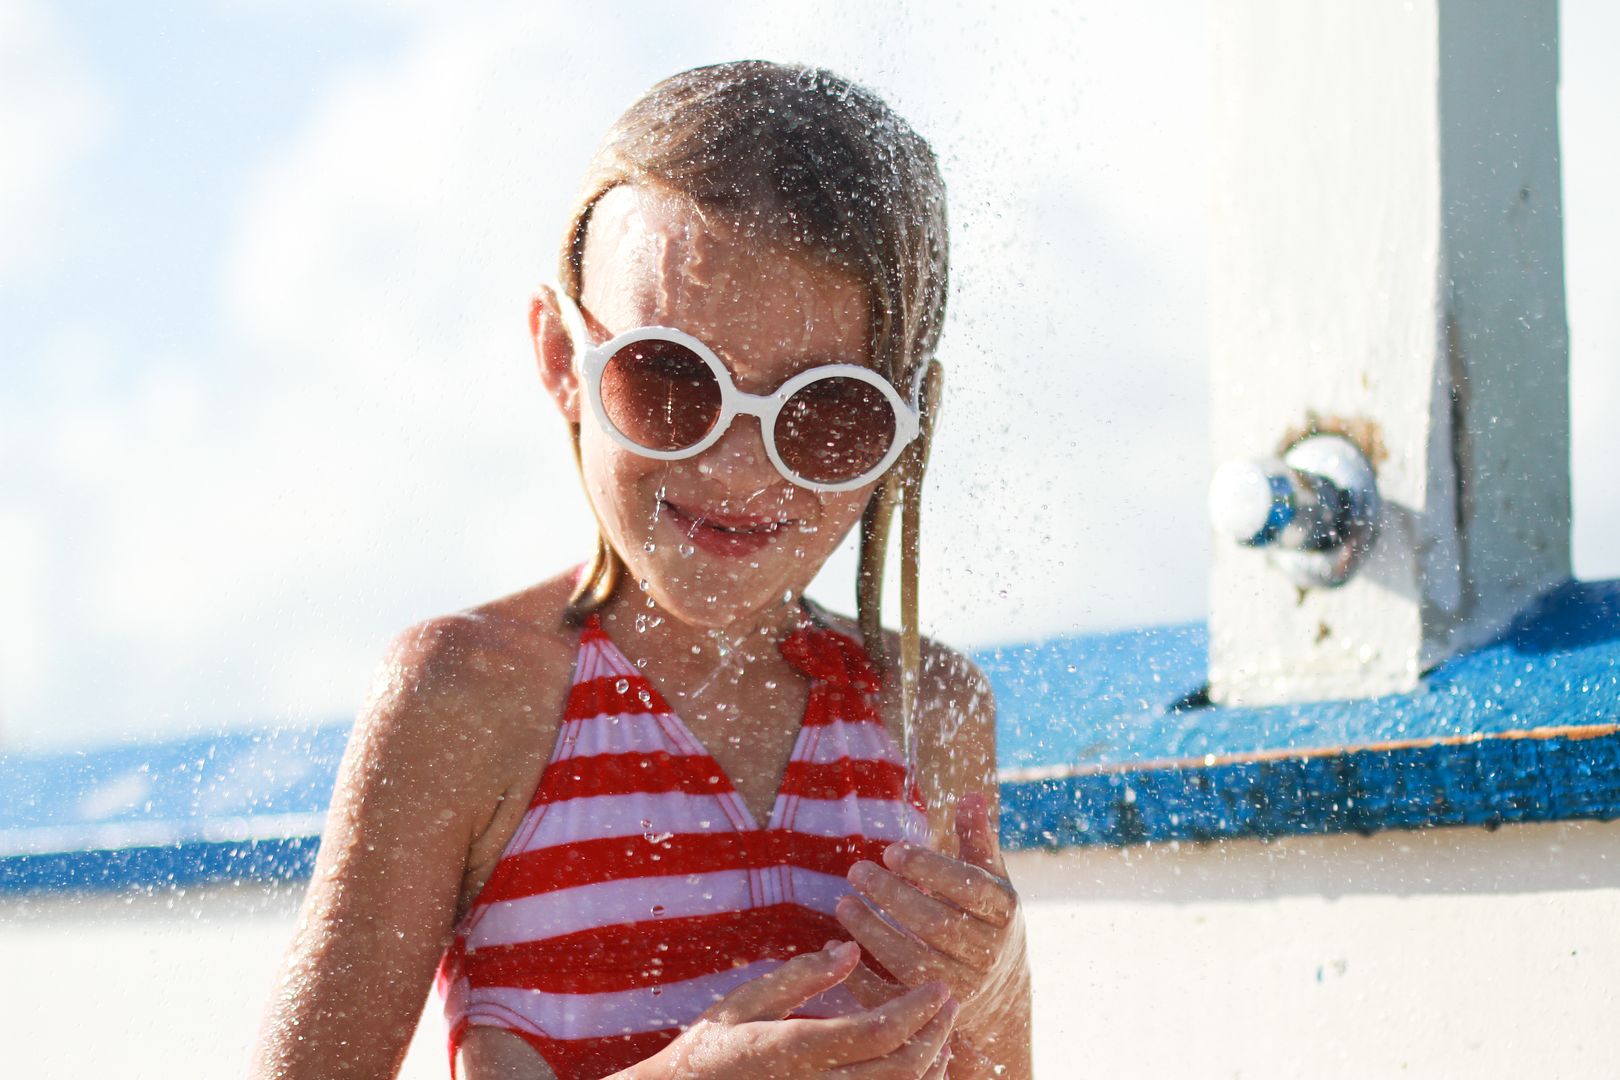 48 Creative Ways To Capture Water Fun This Summer Enjoying The Small 